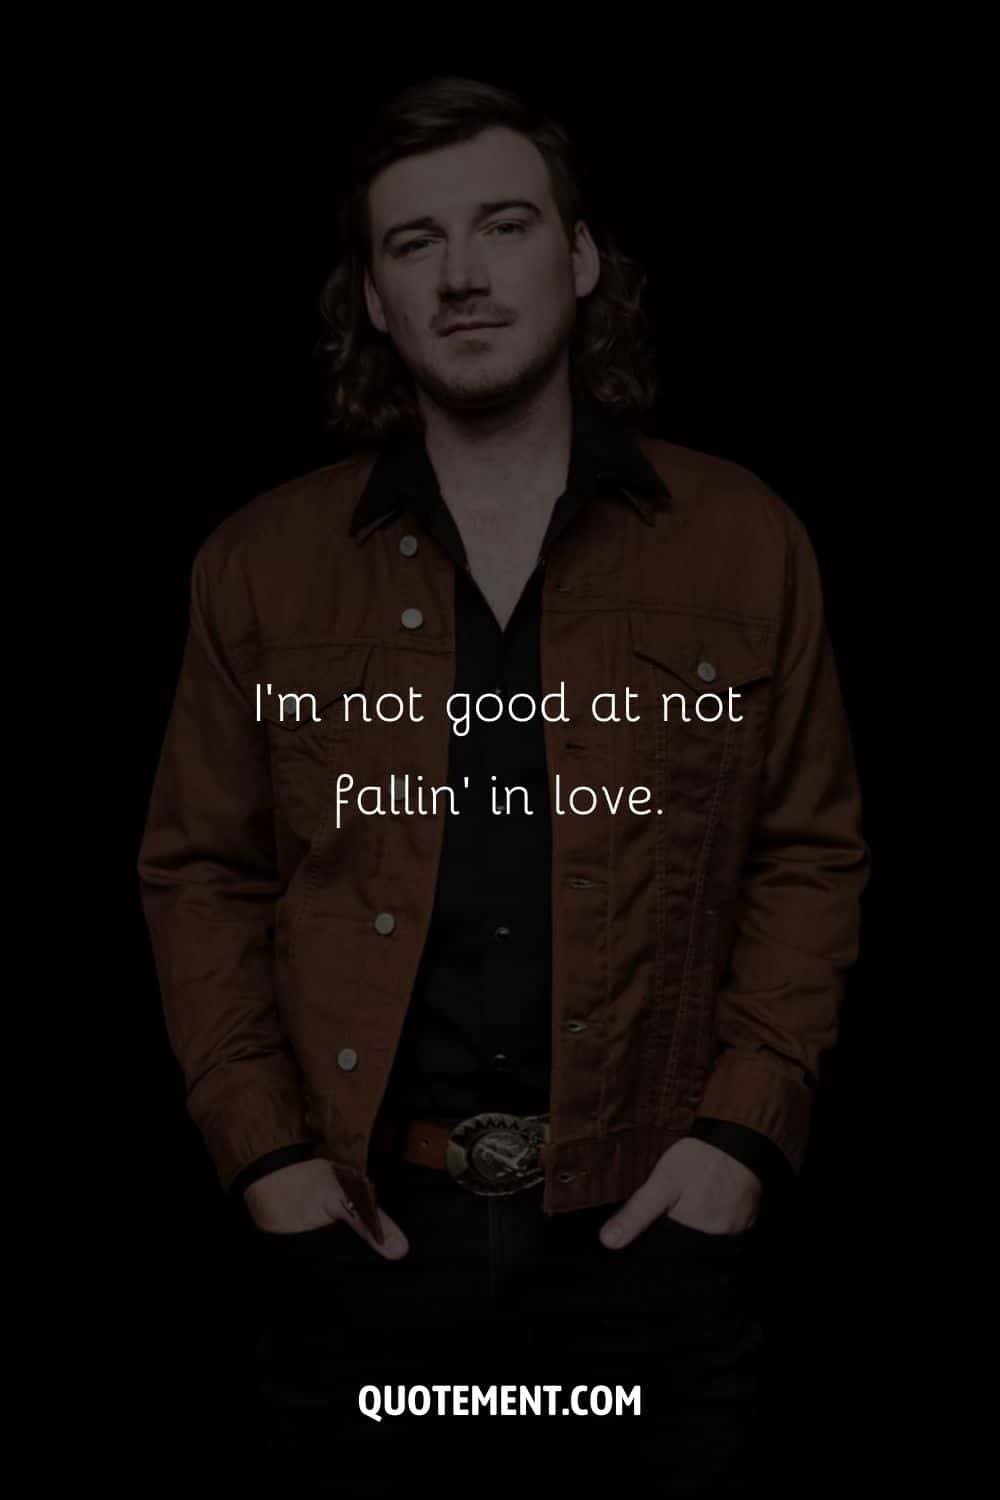 a photograph of a man with light hair representing morgan wallen quote from songs